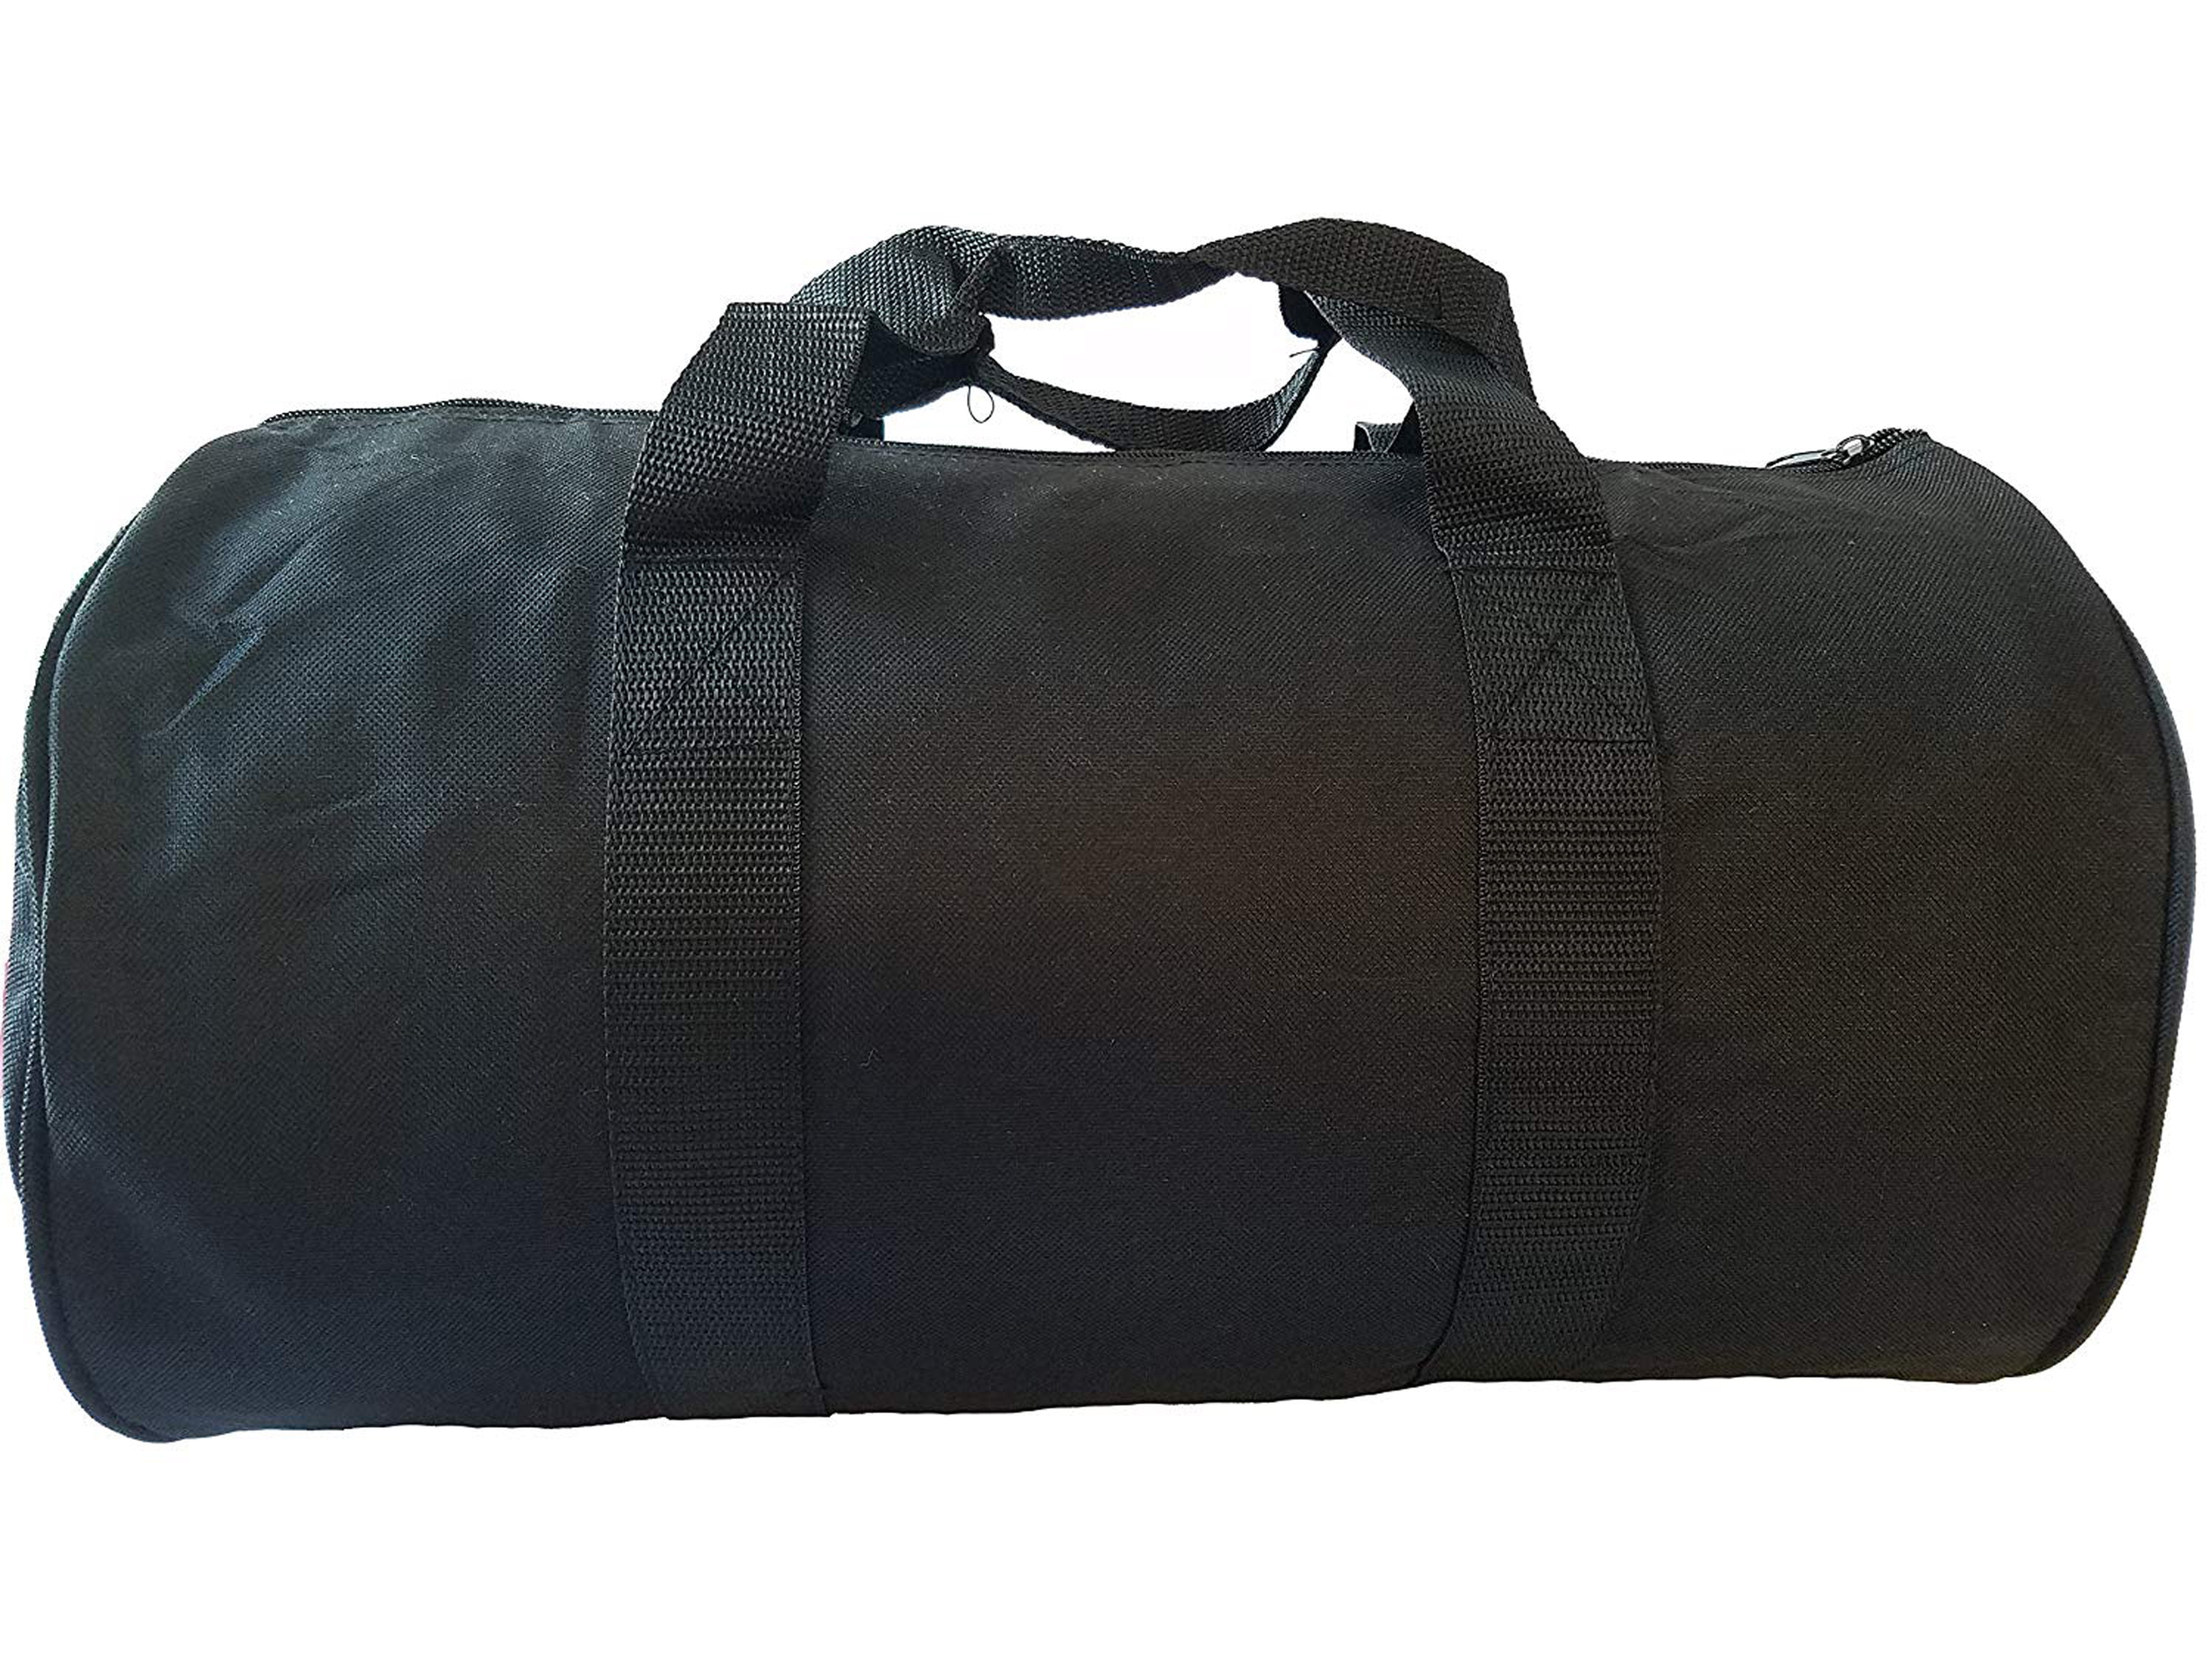 ImpecGear Round Duffel Sports Bags, Travel Gym Fitness Bag, Men's